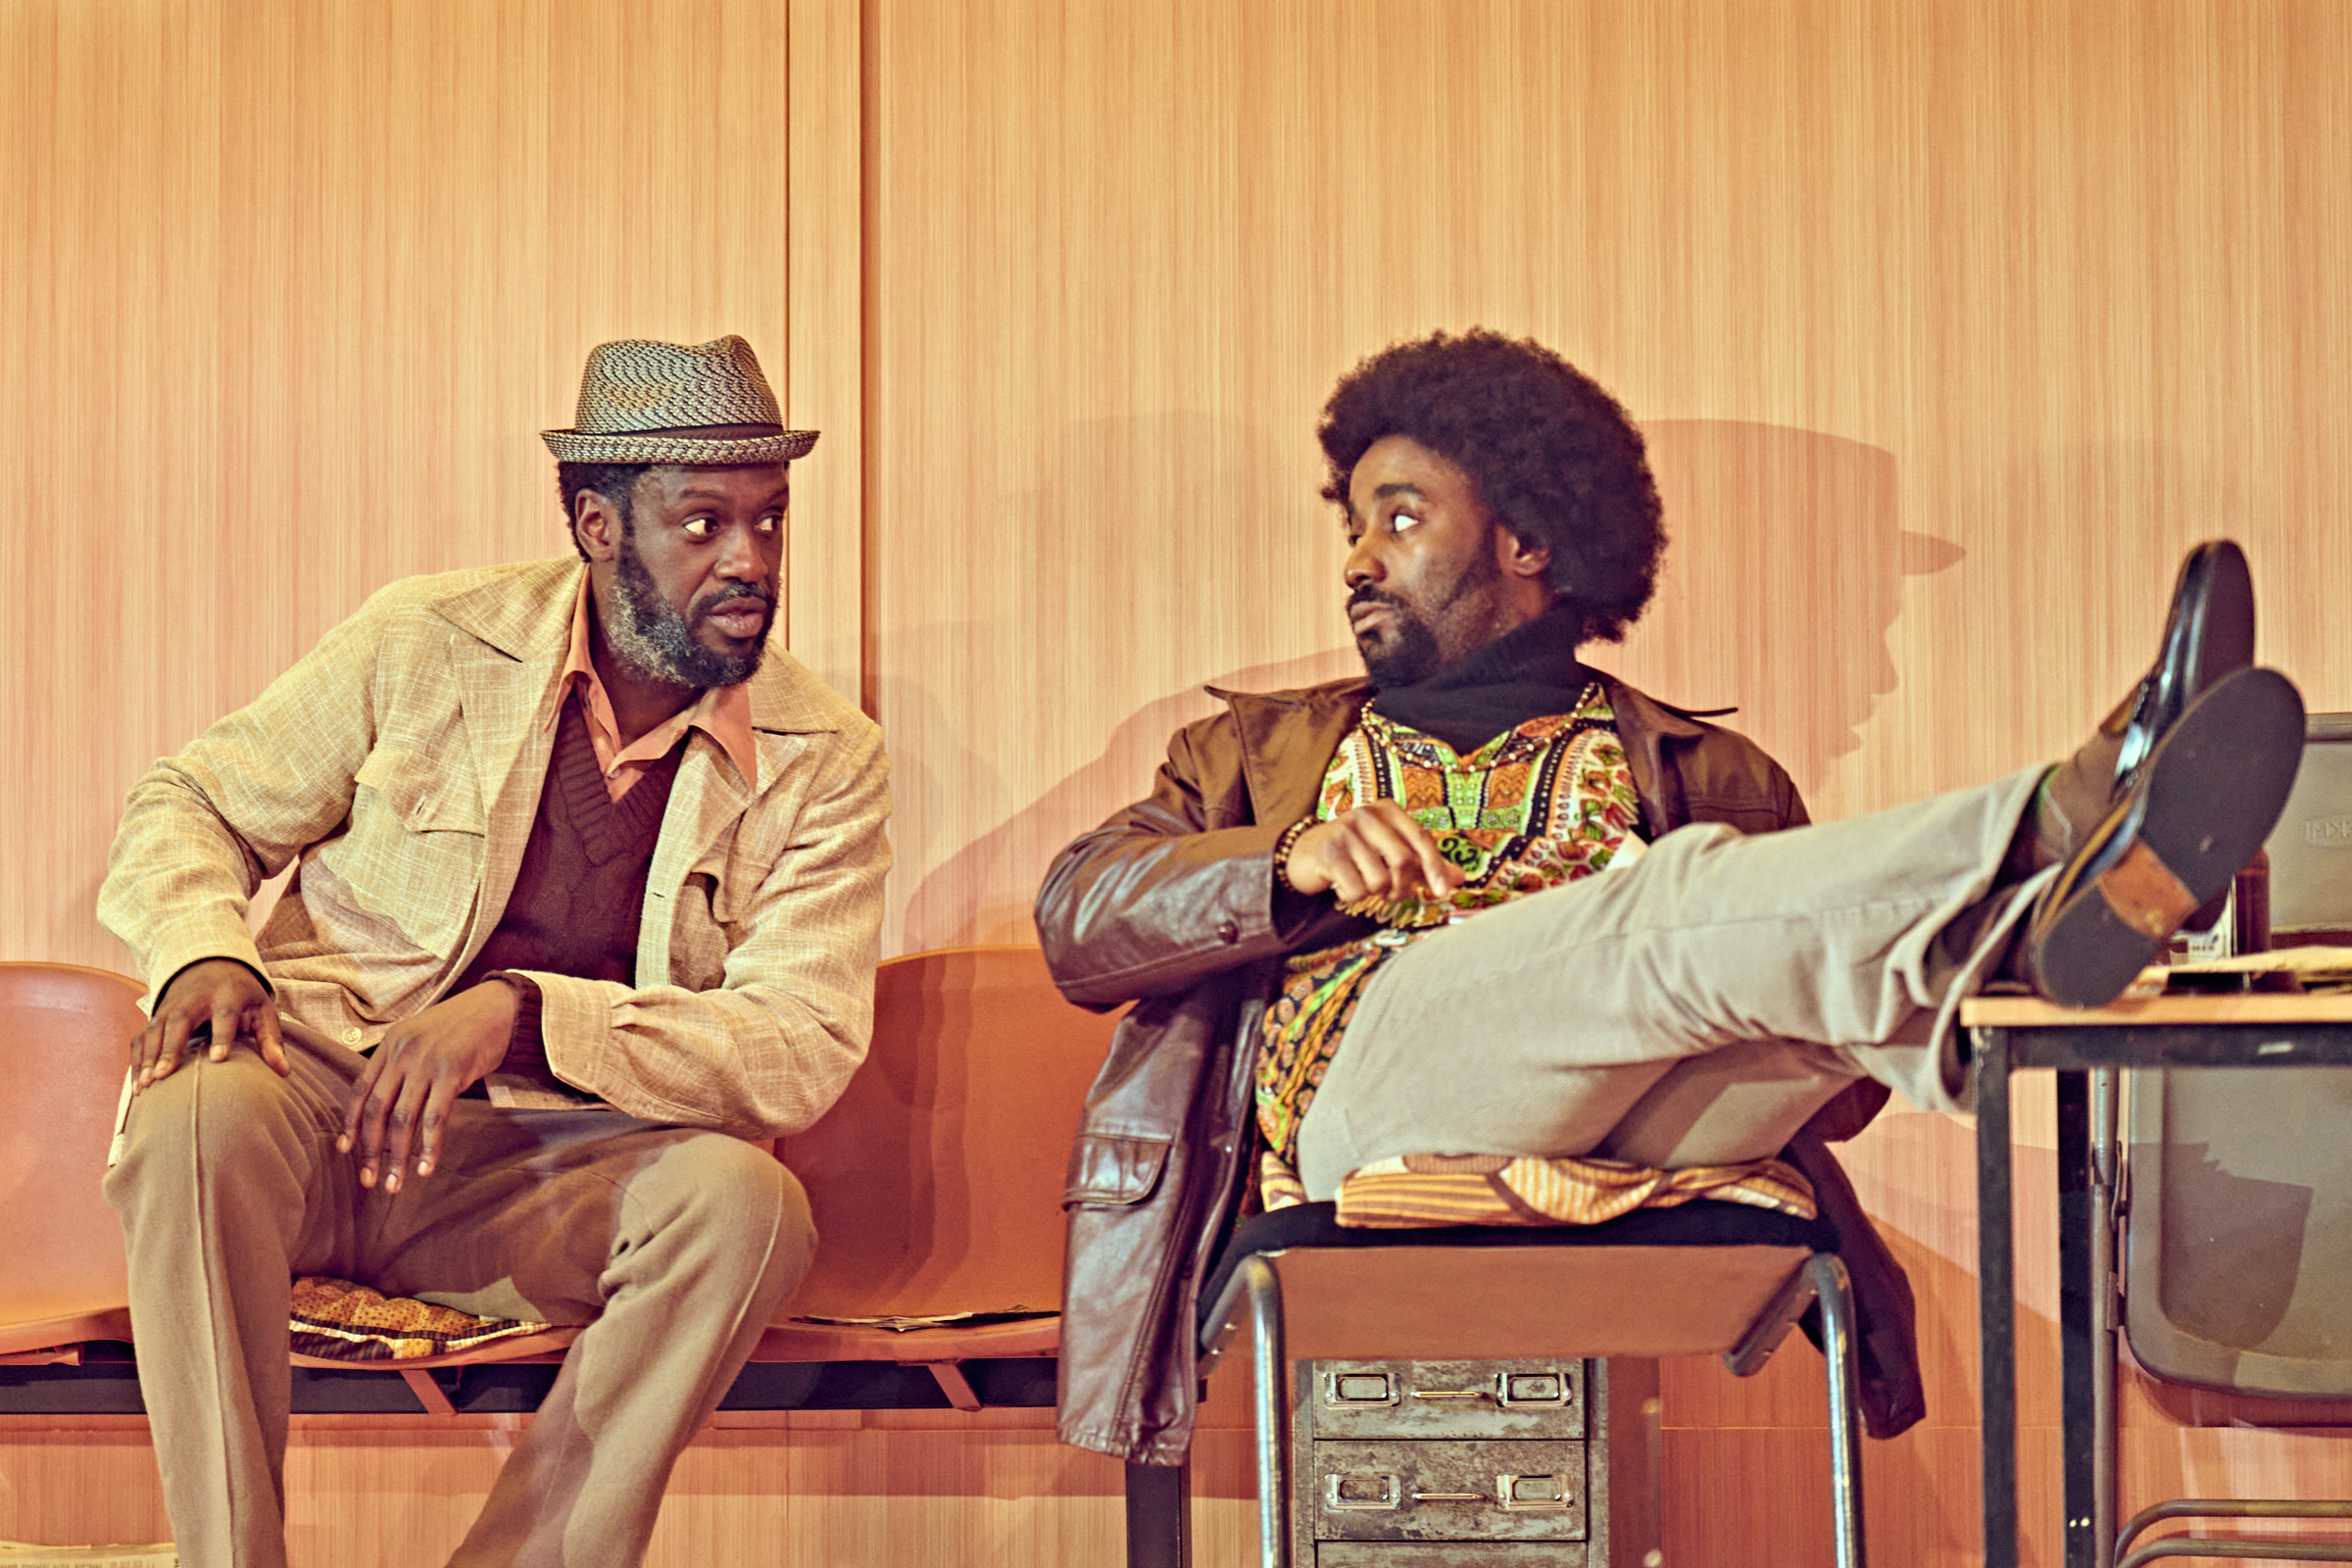 Sule Rimi as Turnbo and Nnabiko Ejimofor as Shealy in Jitney at The Old Vic